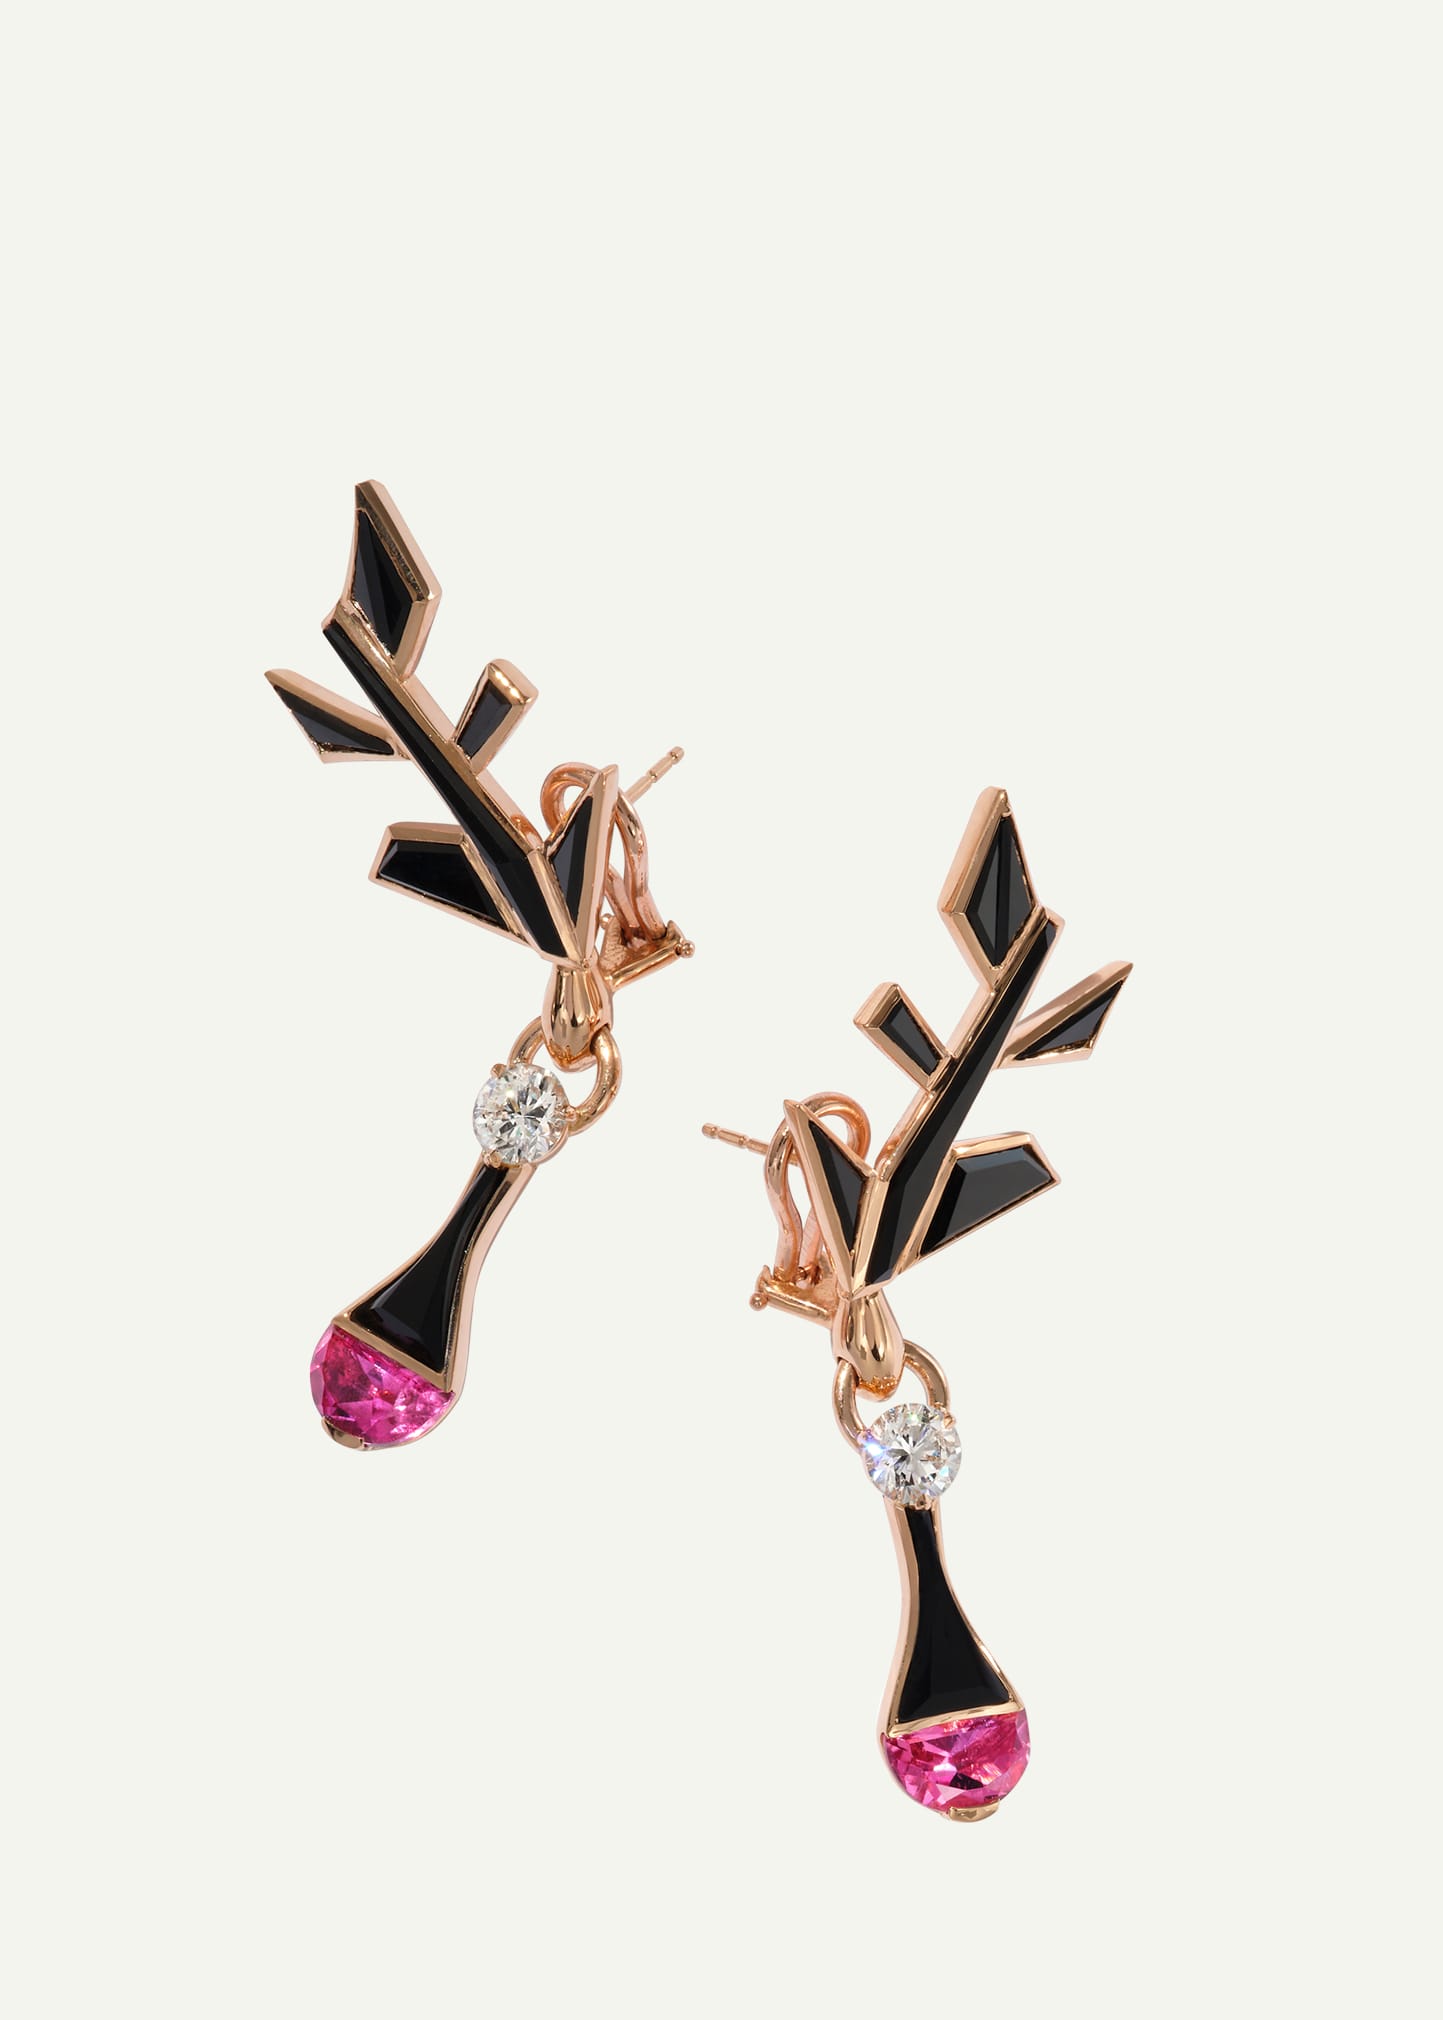 20K Rose Gold Quill Earrings with Diamonds, Rubellite and Black Spinel